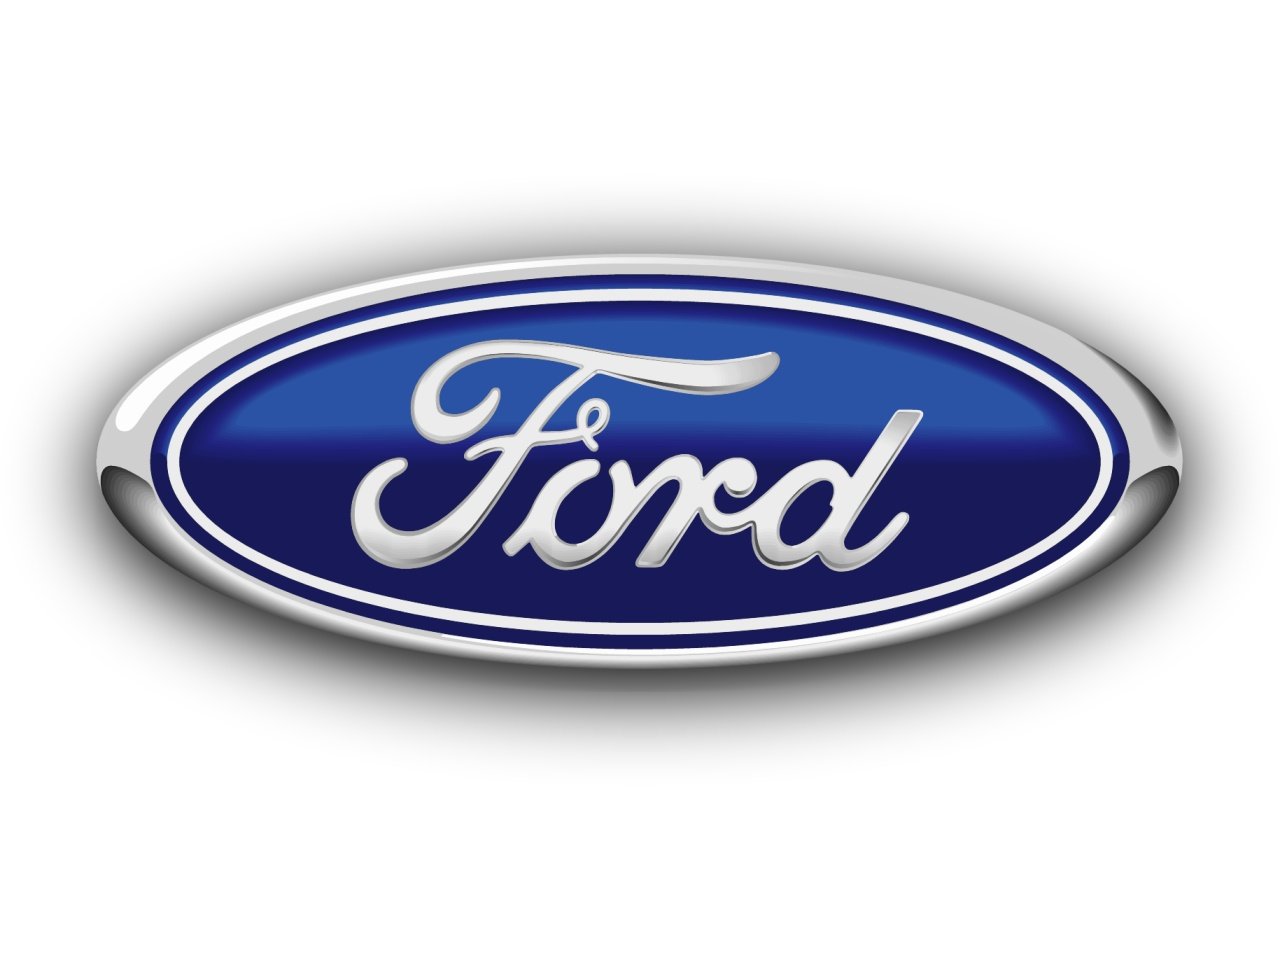 Ford credit cards